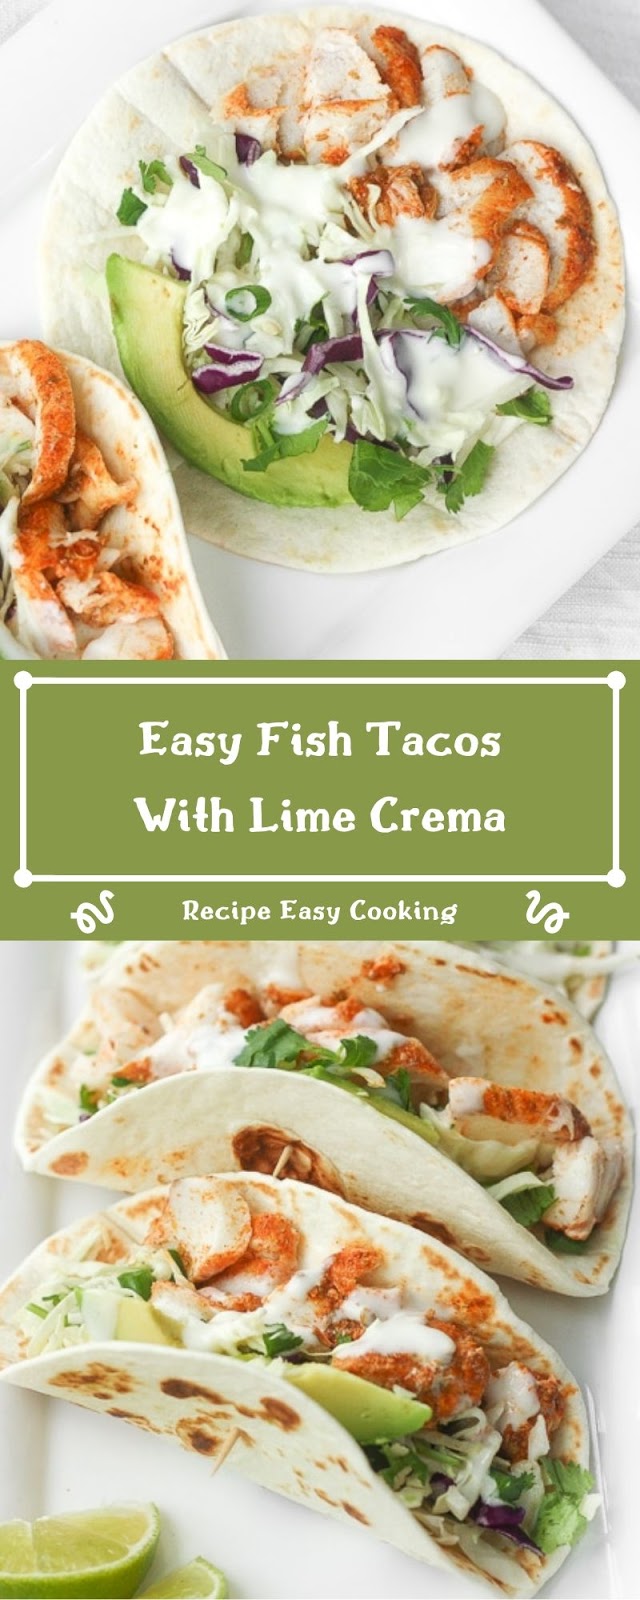 Easy Fish Tacos With Lime Crema